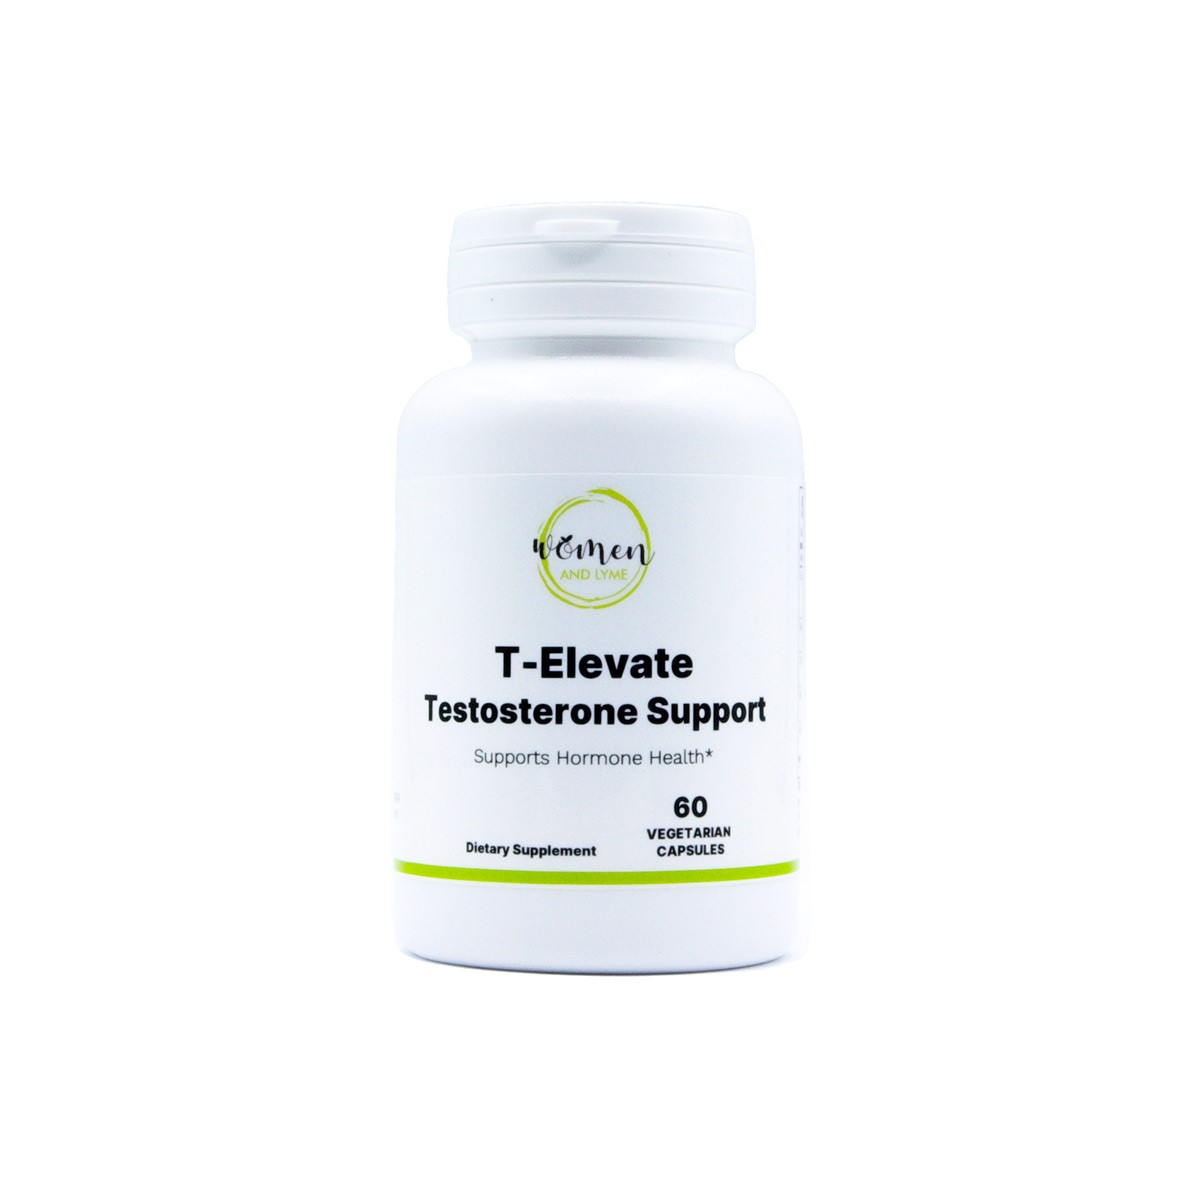 T-Elevate or Testosterone Support